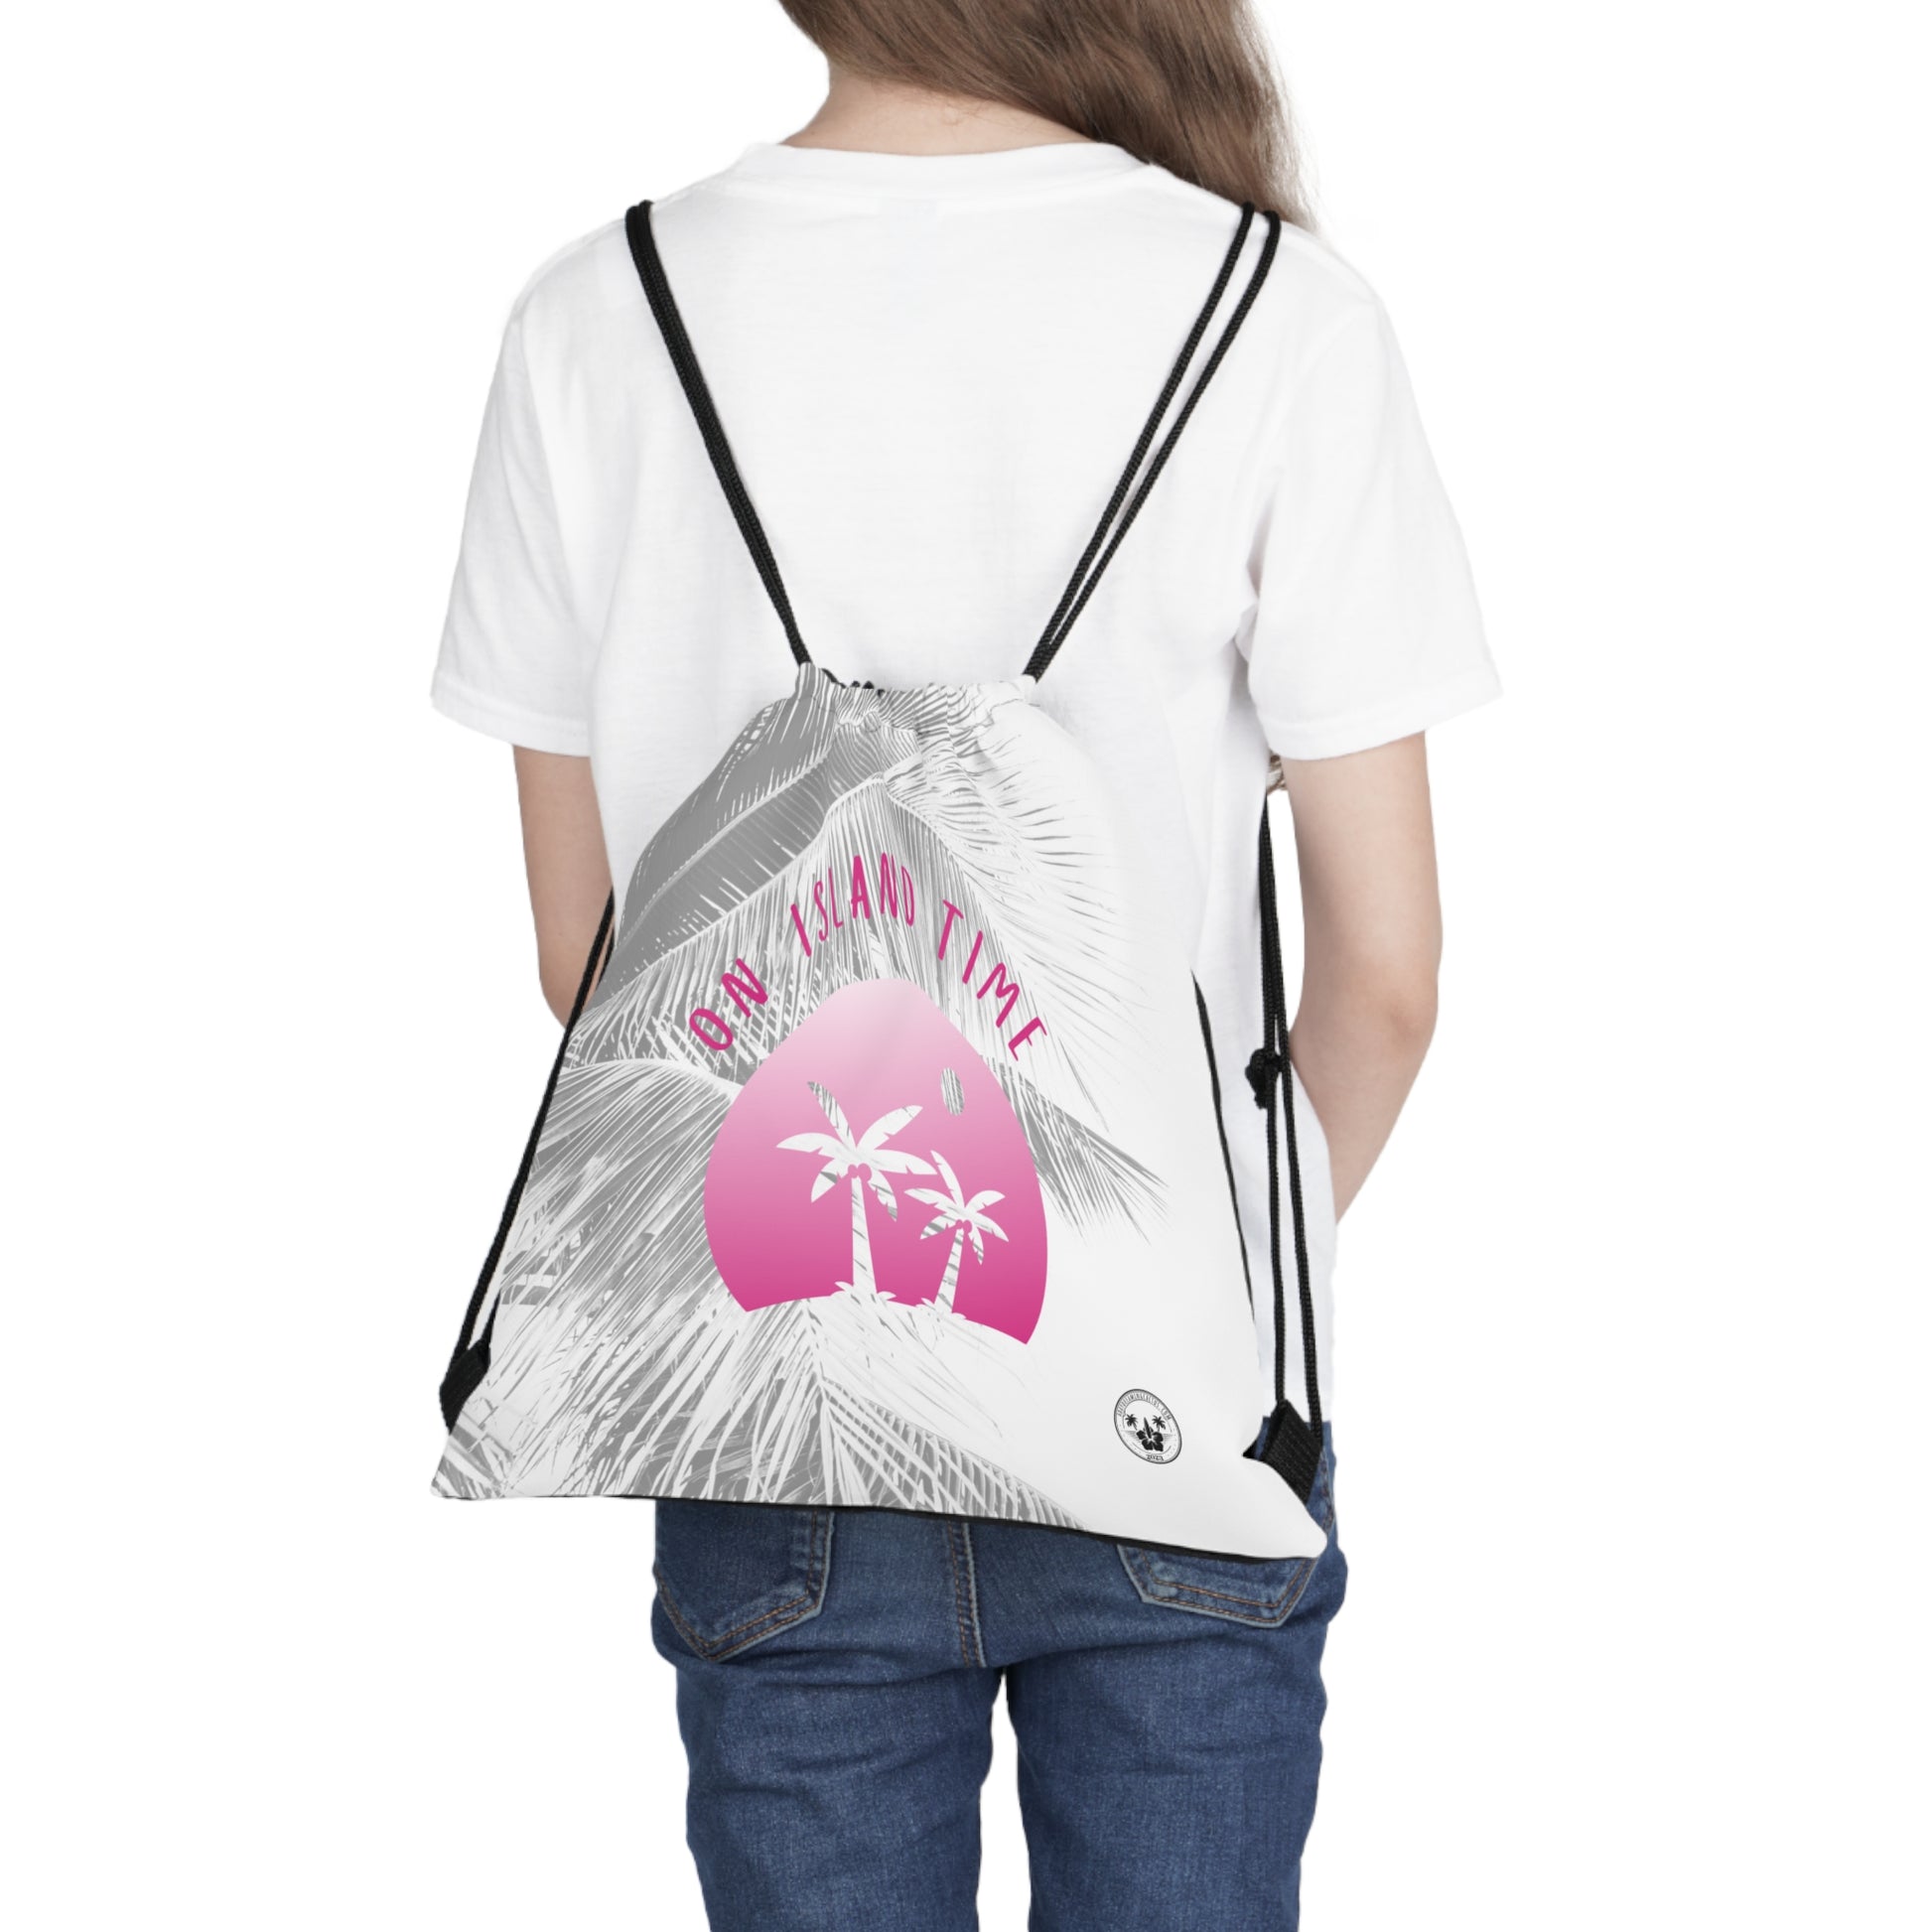 A Daydreaming Cactus created the ultimate travel companion drawstring backpack combines functionality with style, featuring a vibrant gradient pink simple graphic of two palmtrees on an island  and grey tone palm tree background with the text "On Island Time" design. Perfect for on-the-go adventurers, this lightweight backpack is ideal for storing essentials while exploring. Grab yours now for an unforgettable journey! This image is front view of the backpack on the back of a model.